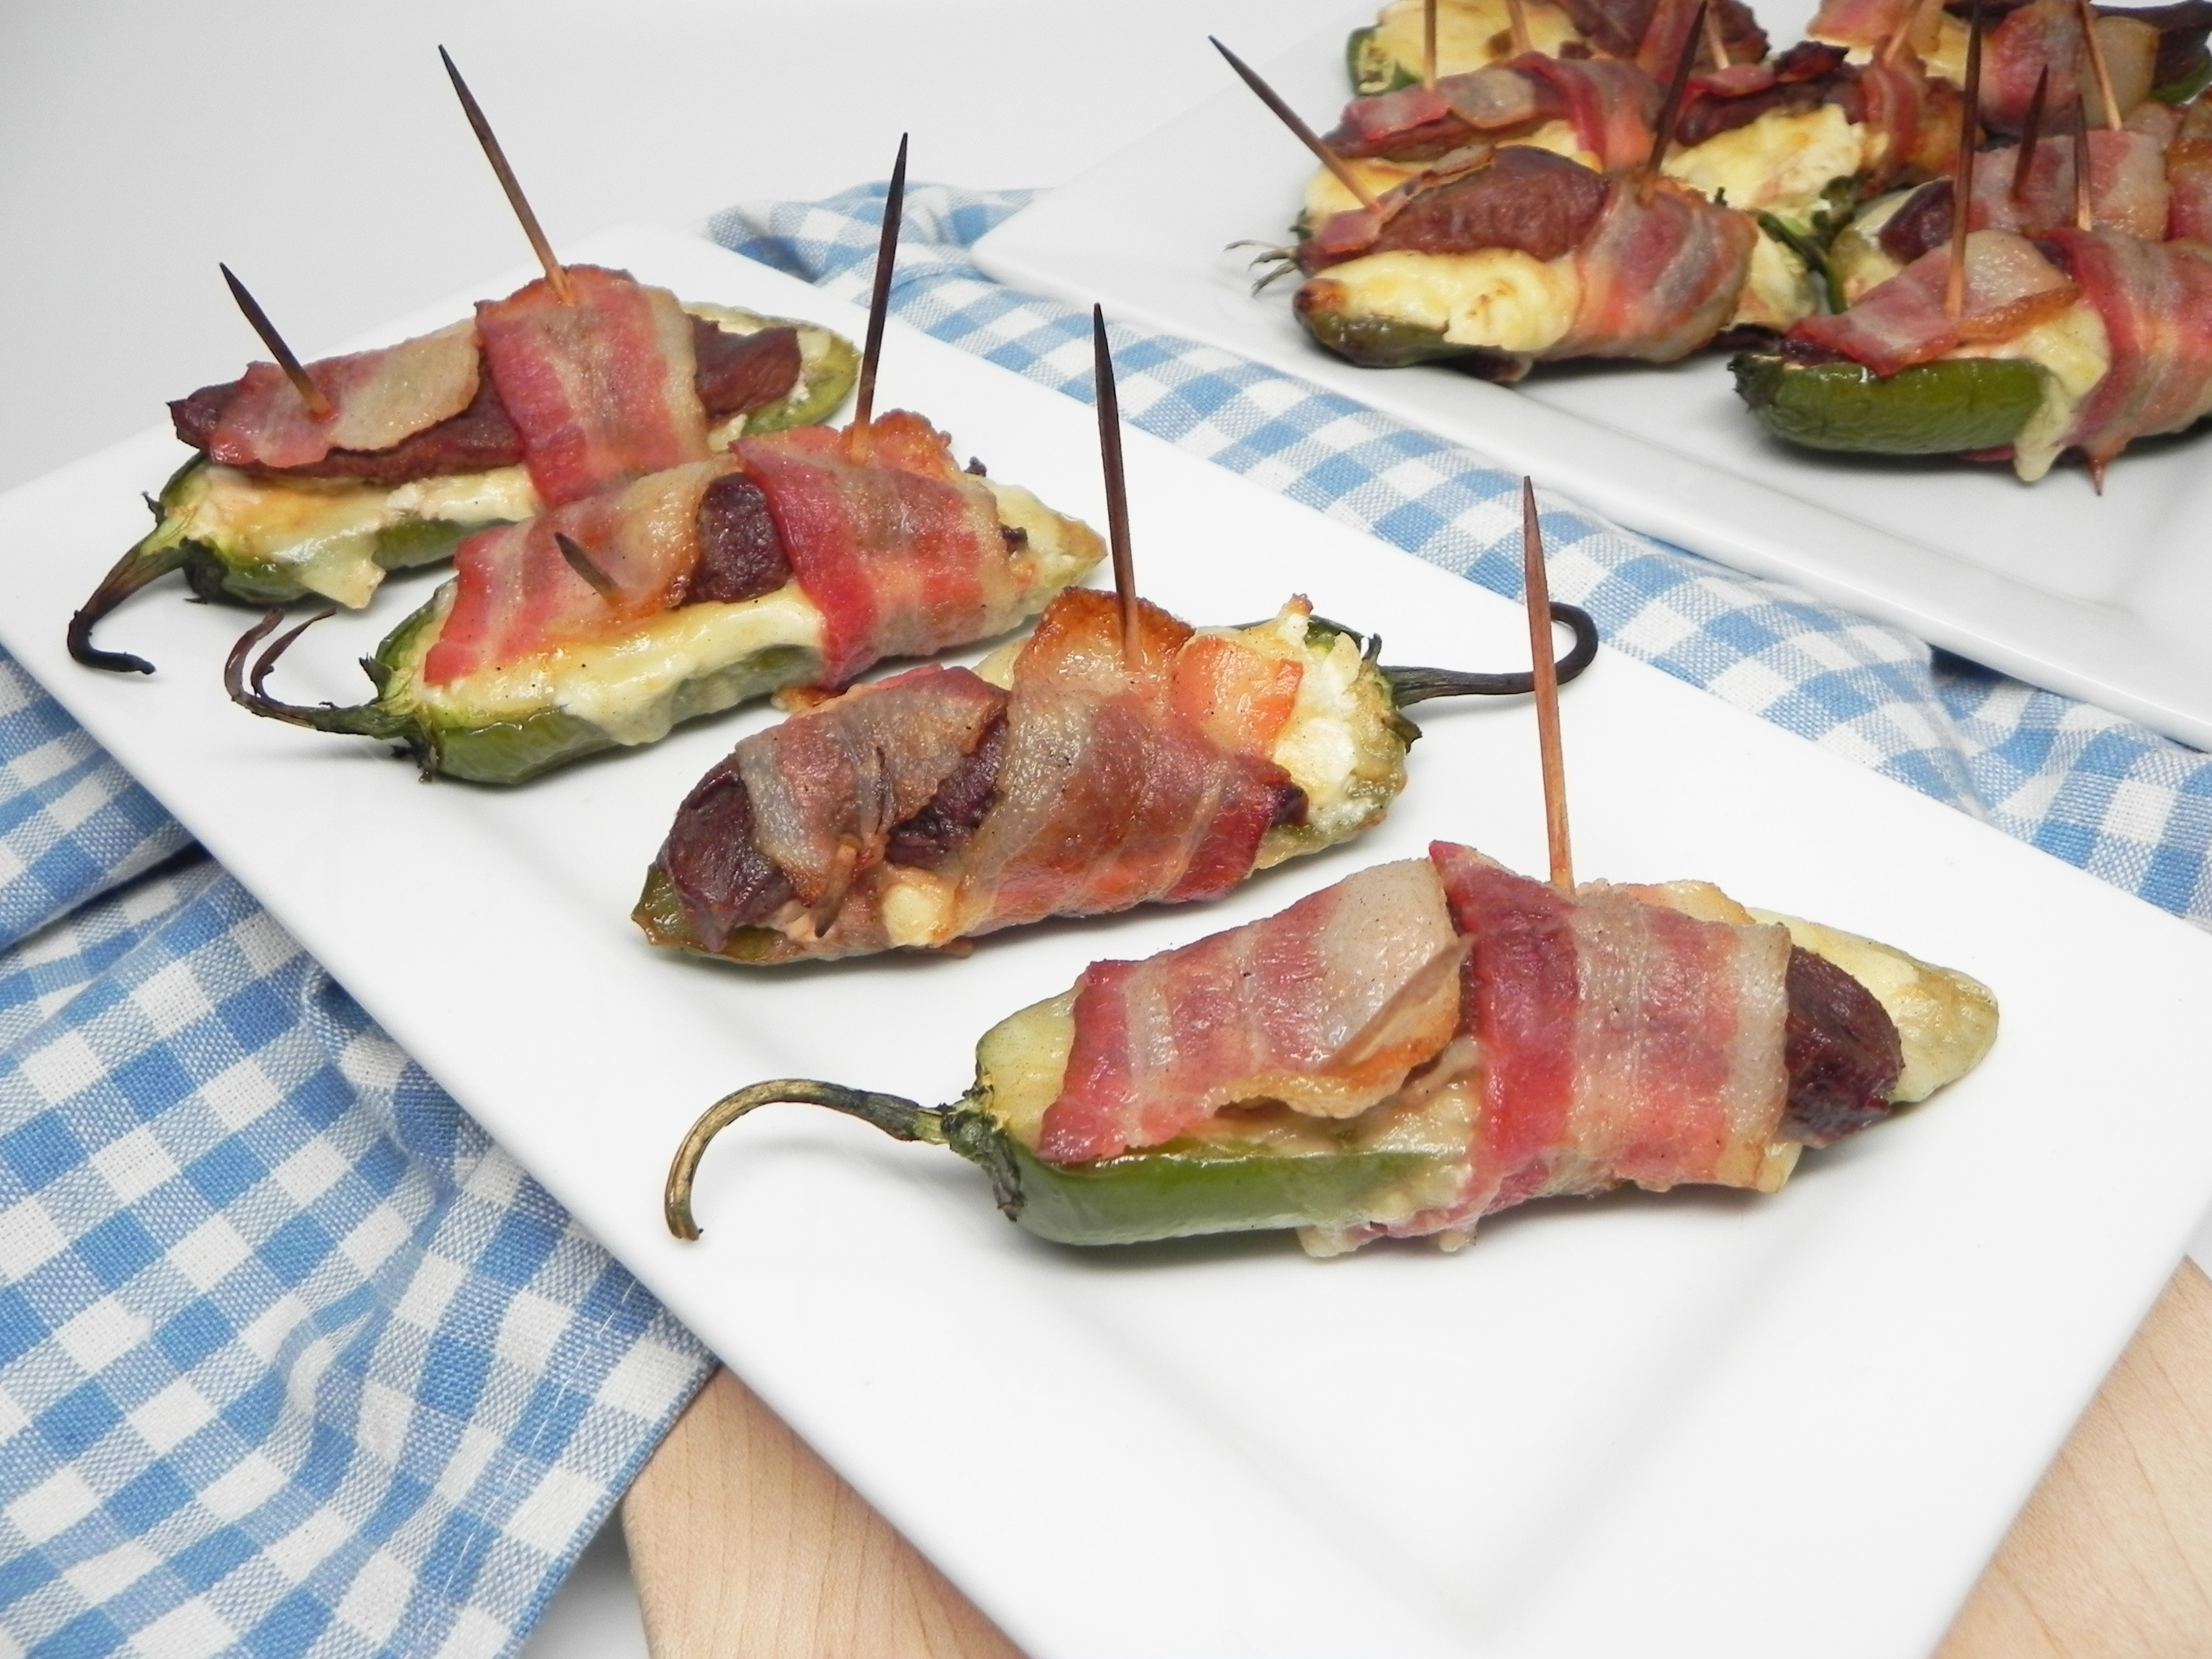 Duck Jalapeno Poppers